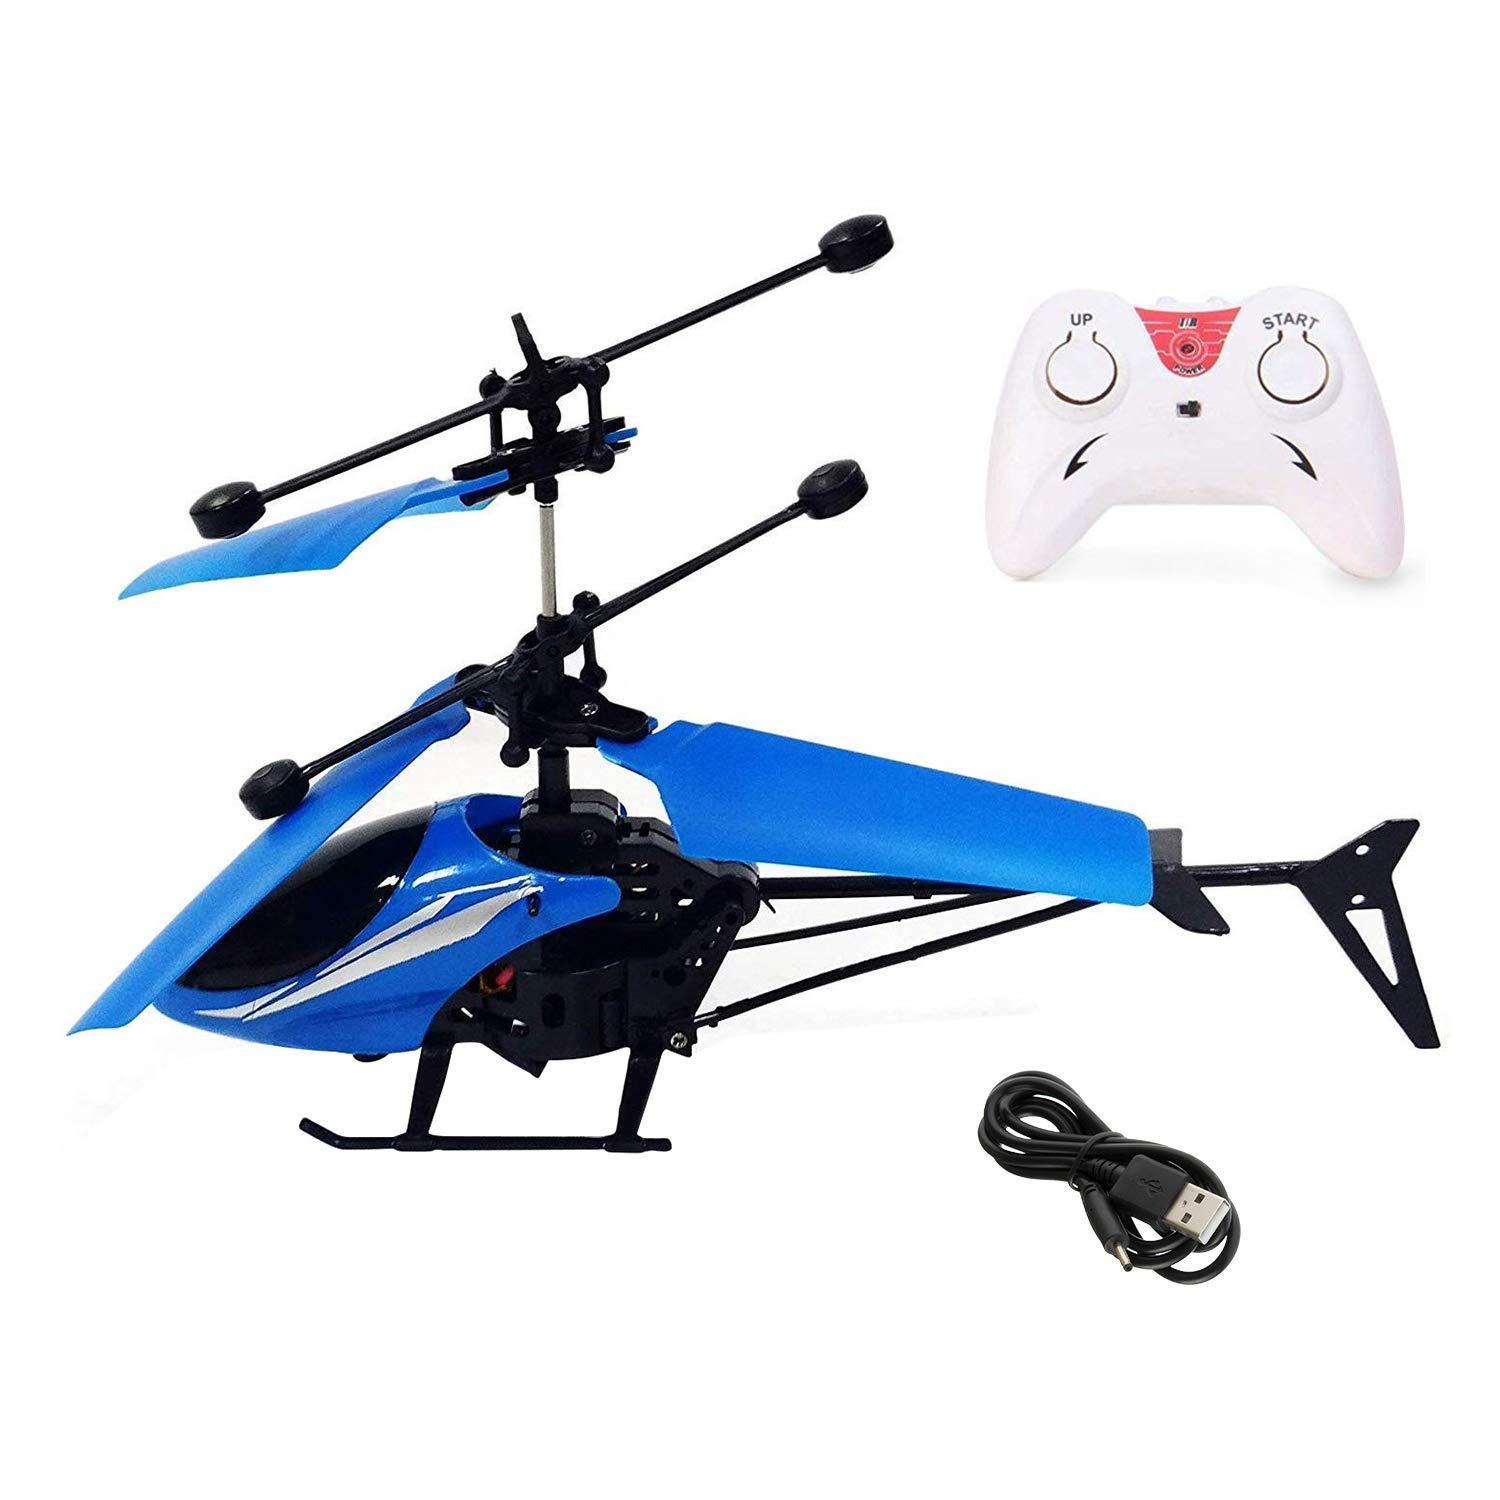 Hand Sensor Remote Control Helicopter: Maximizing Convenience with Hand Sensor Technology